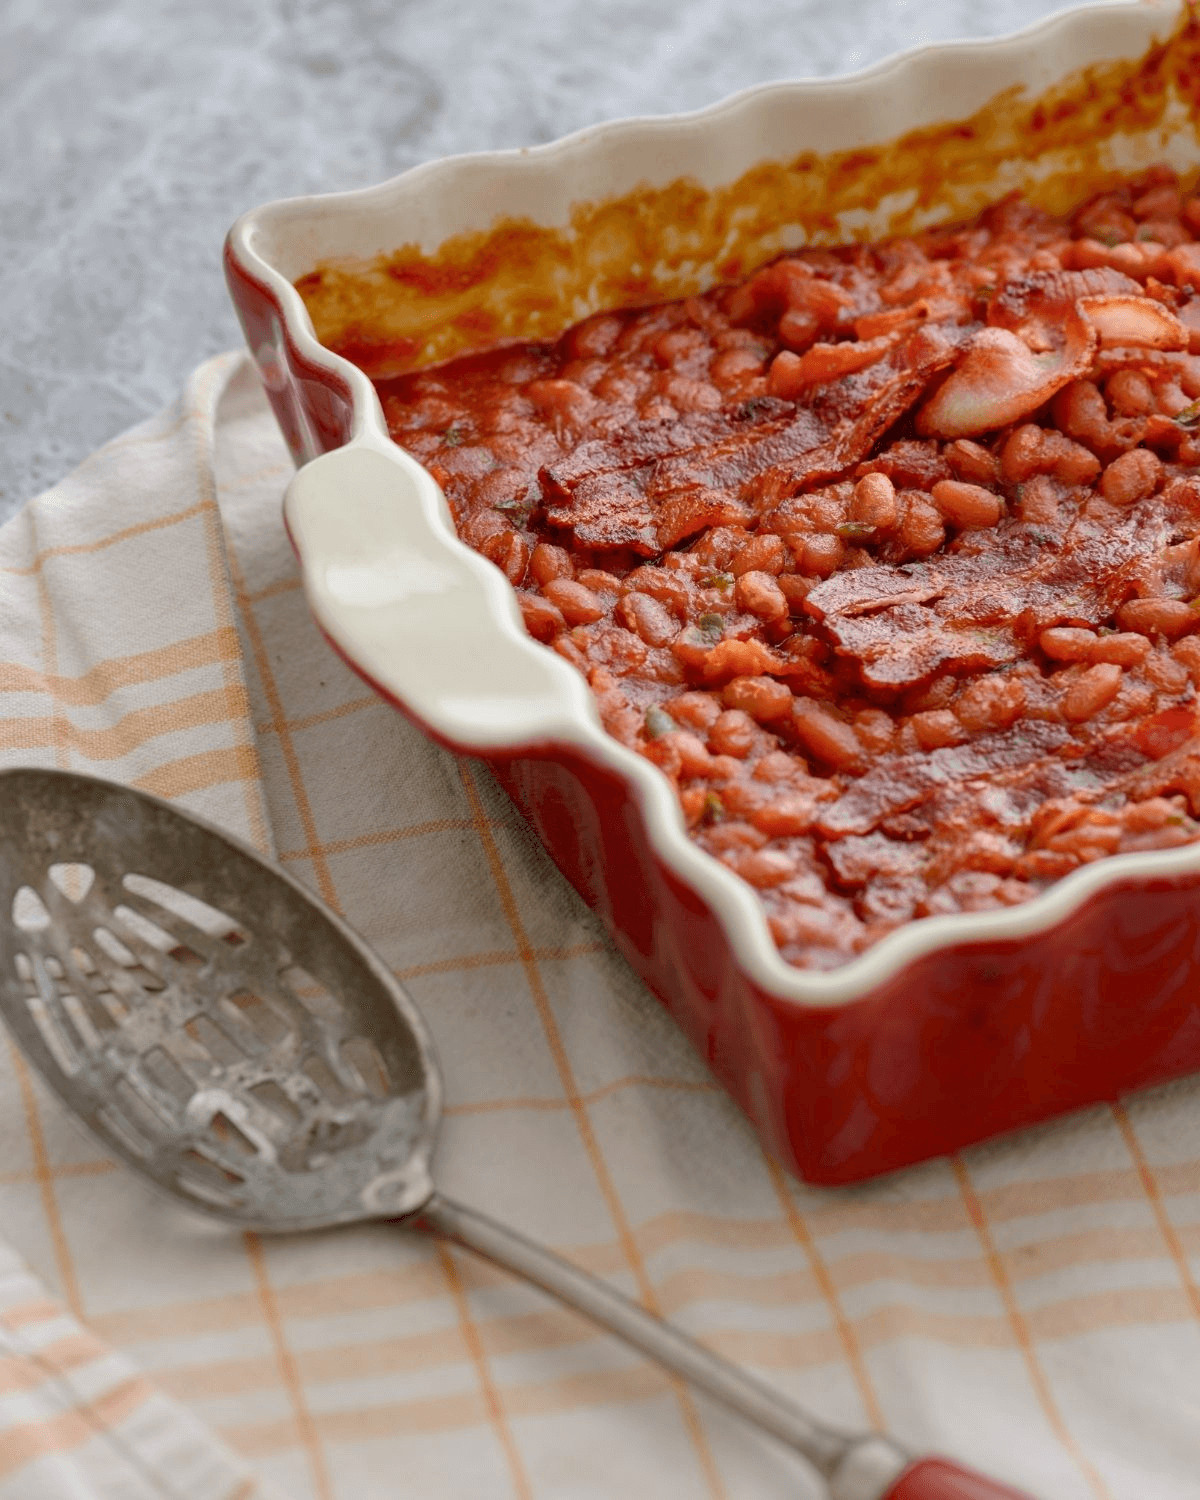 A spoon next to southern style baked beans.